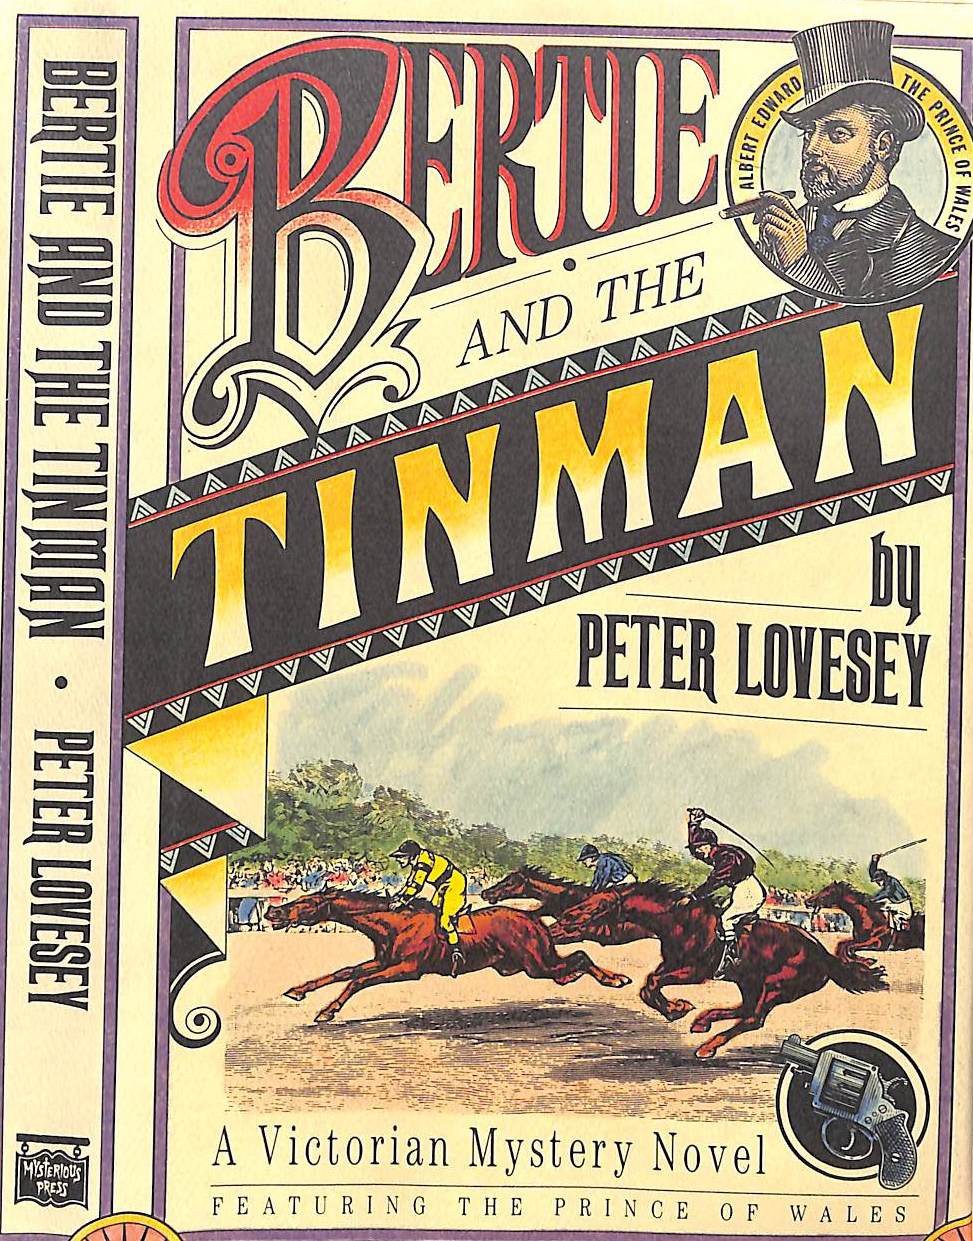 "Bertie And The Tin Man" 1988 LOVESEY, Peter